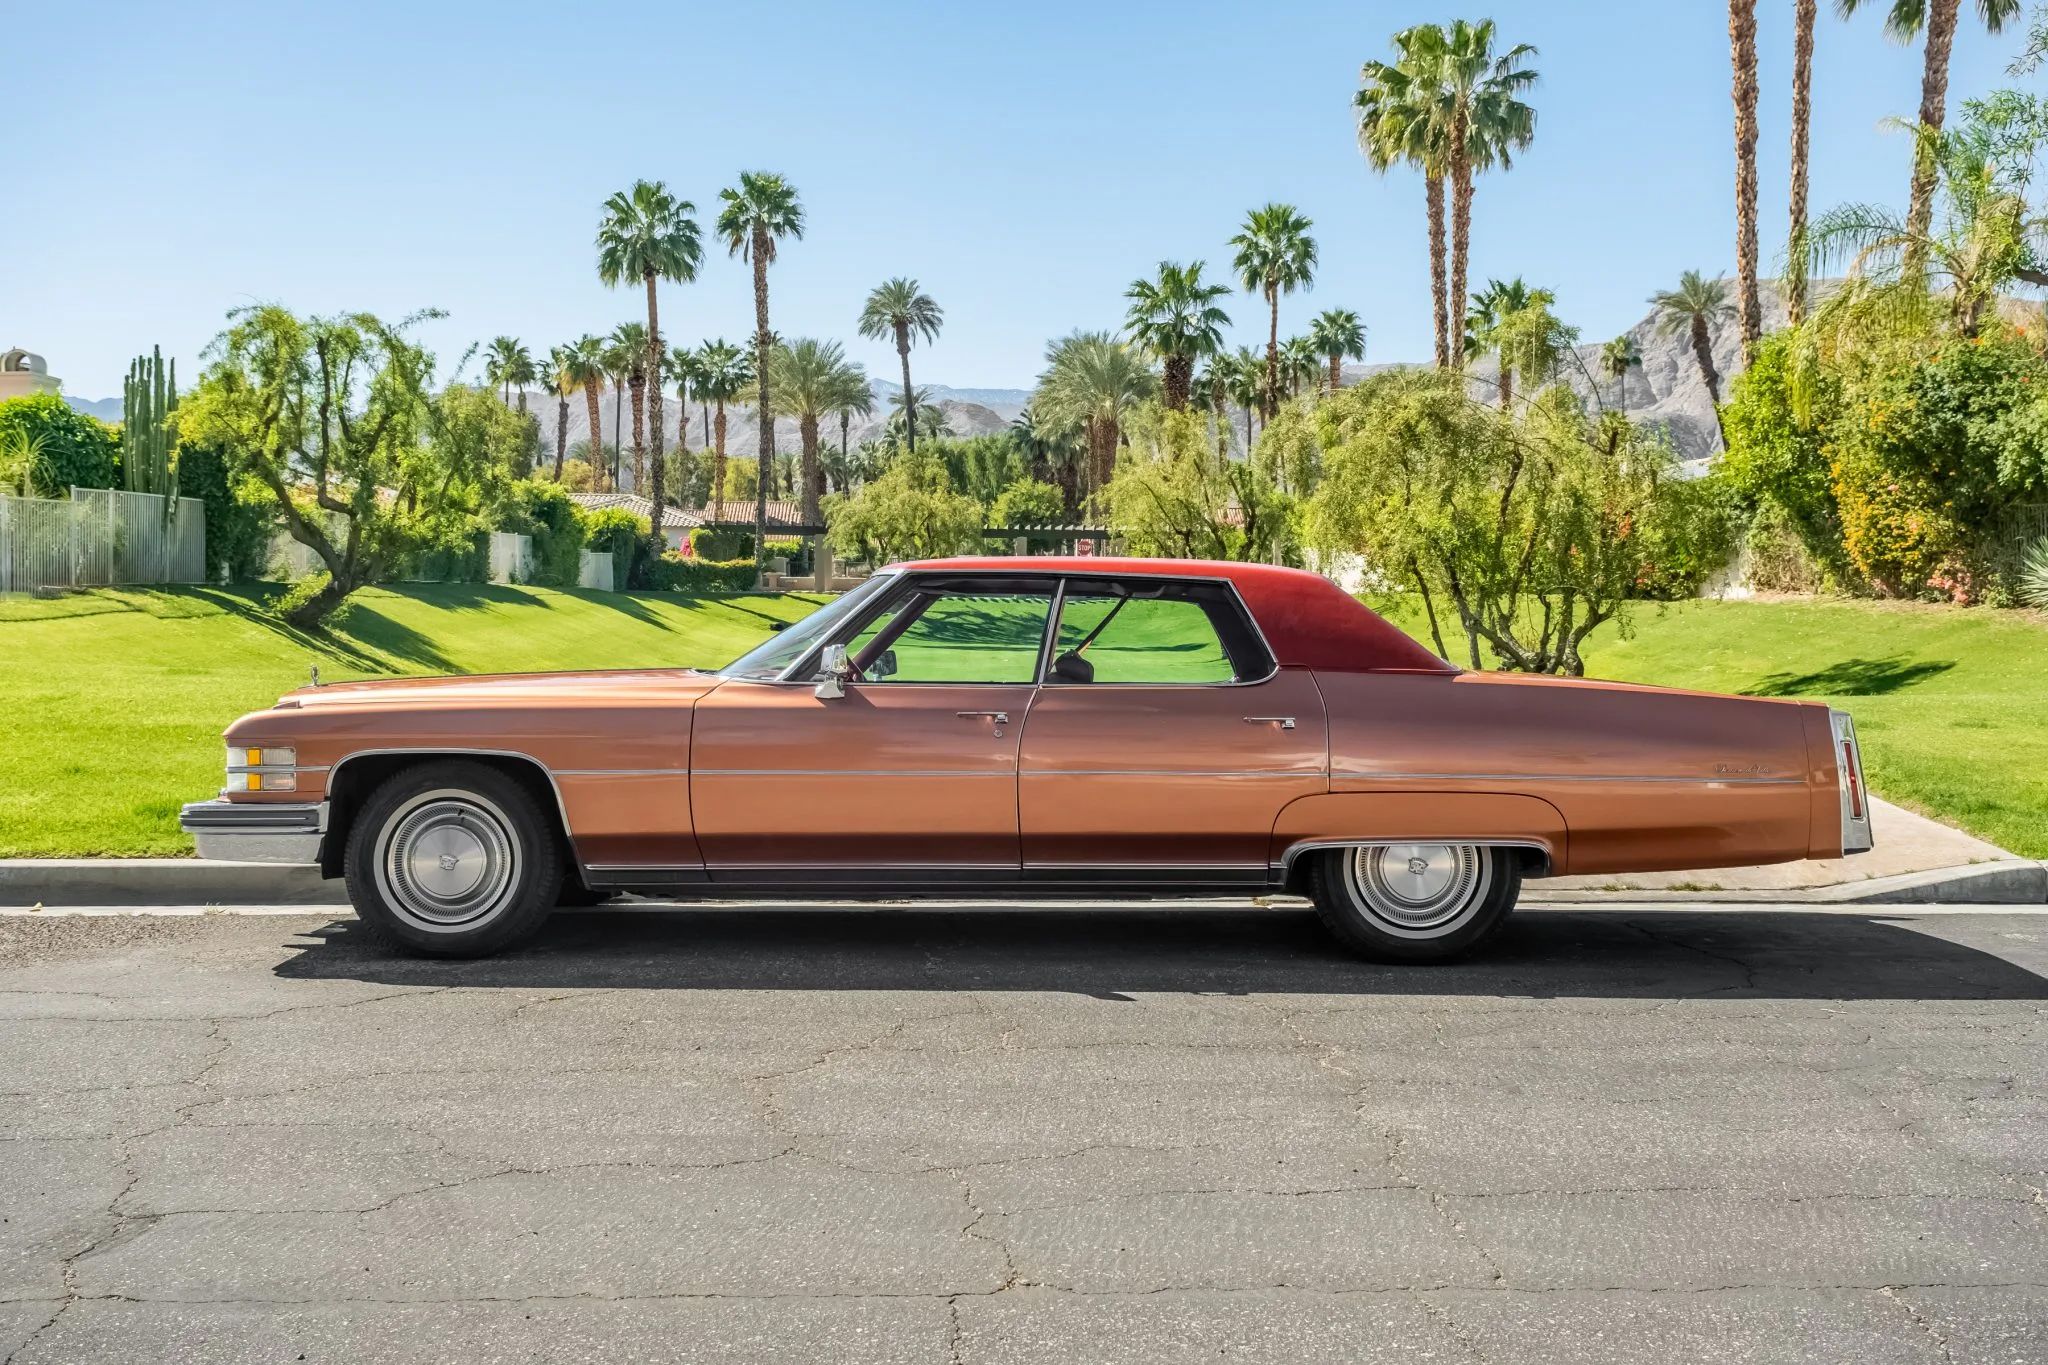 Cadillac DeVille from 1974 